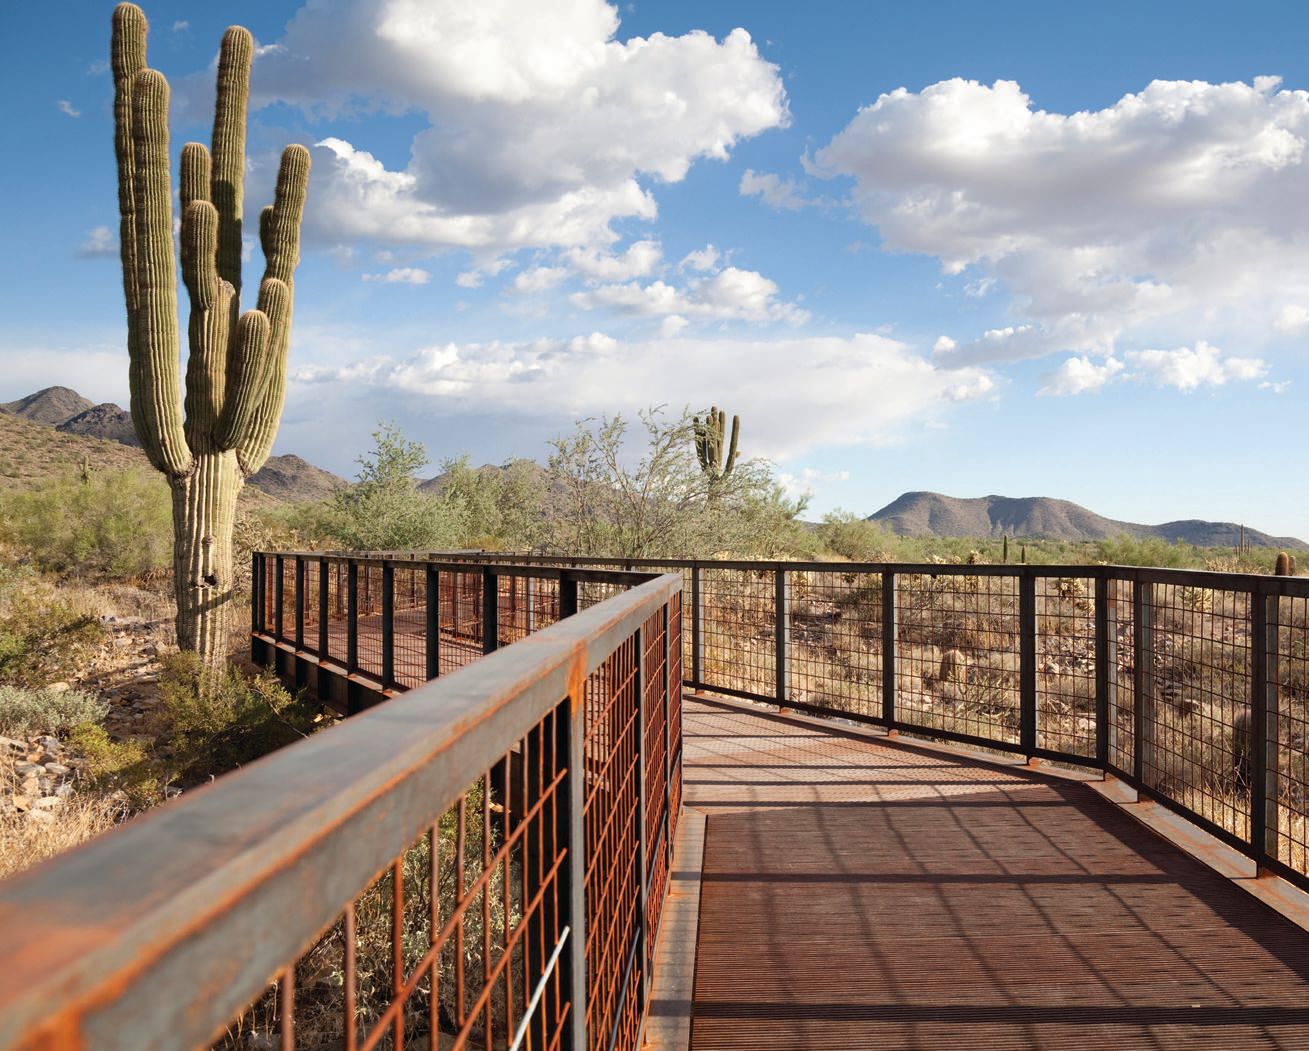 On the McDowell Sonoran Preserve, hikers can find the Getaway trailhead bridge PHOTO BY: DOUG BENNETT